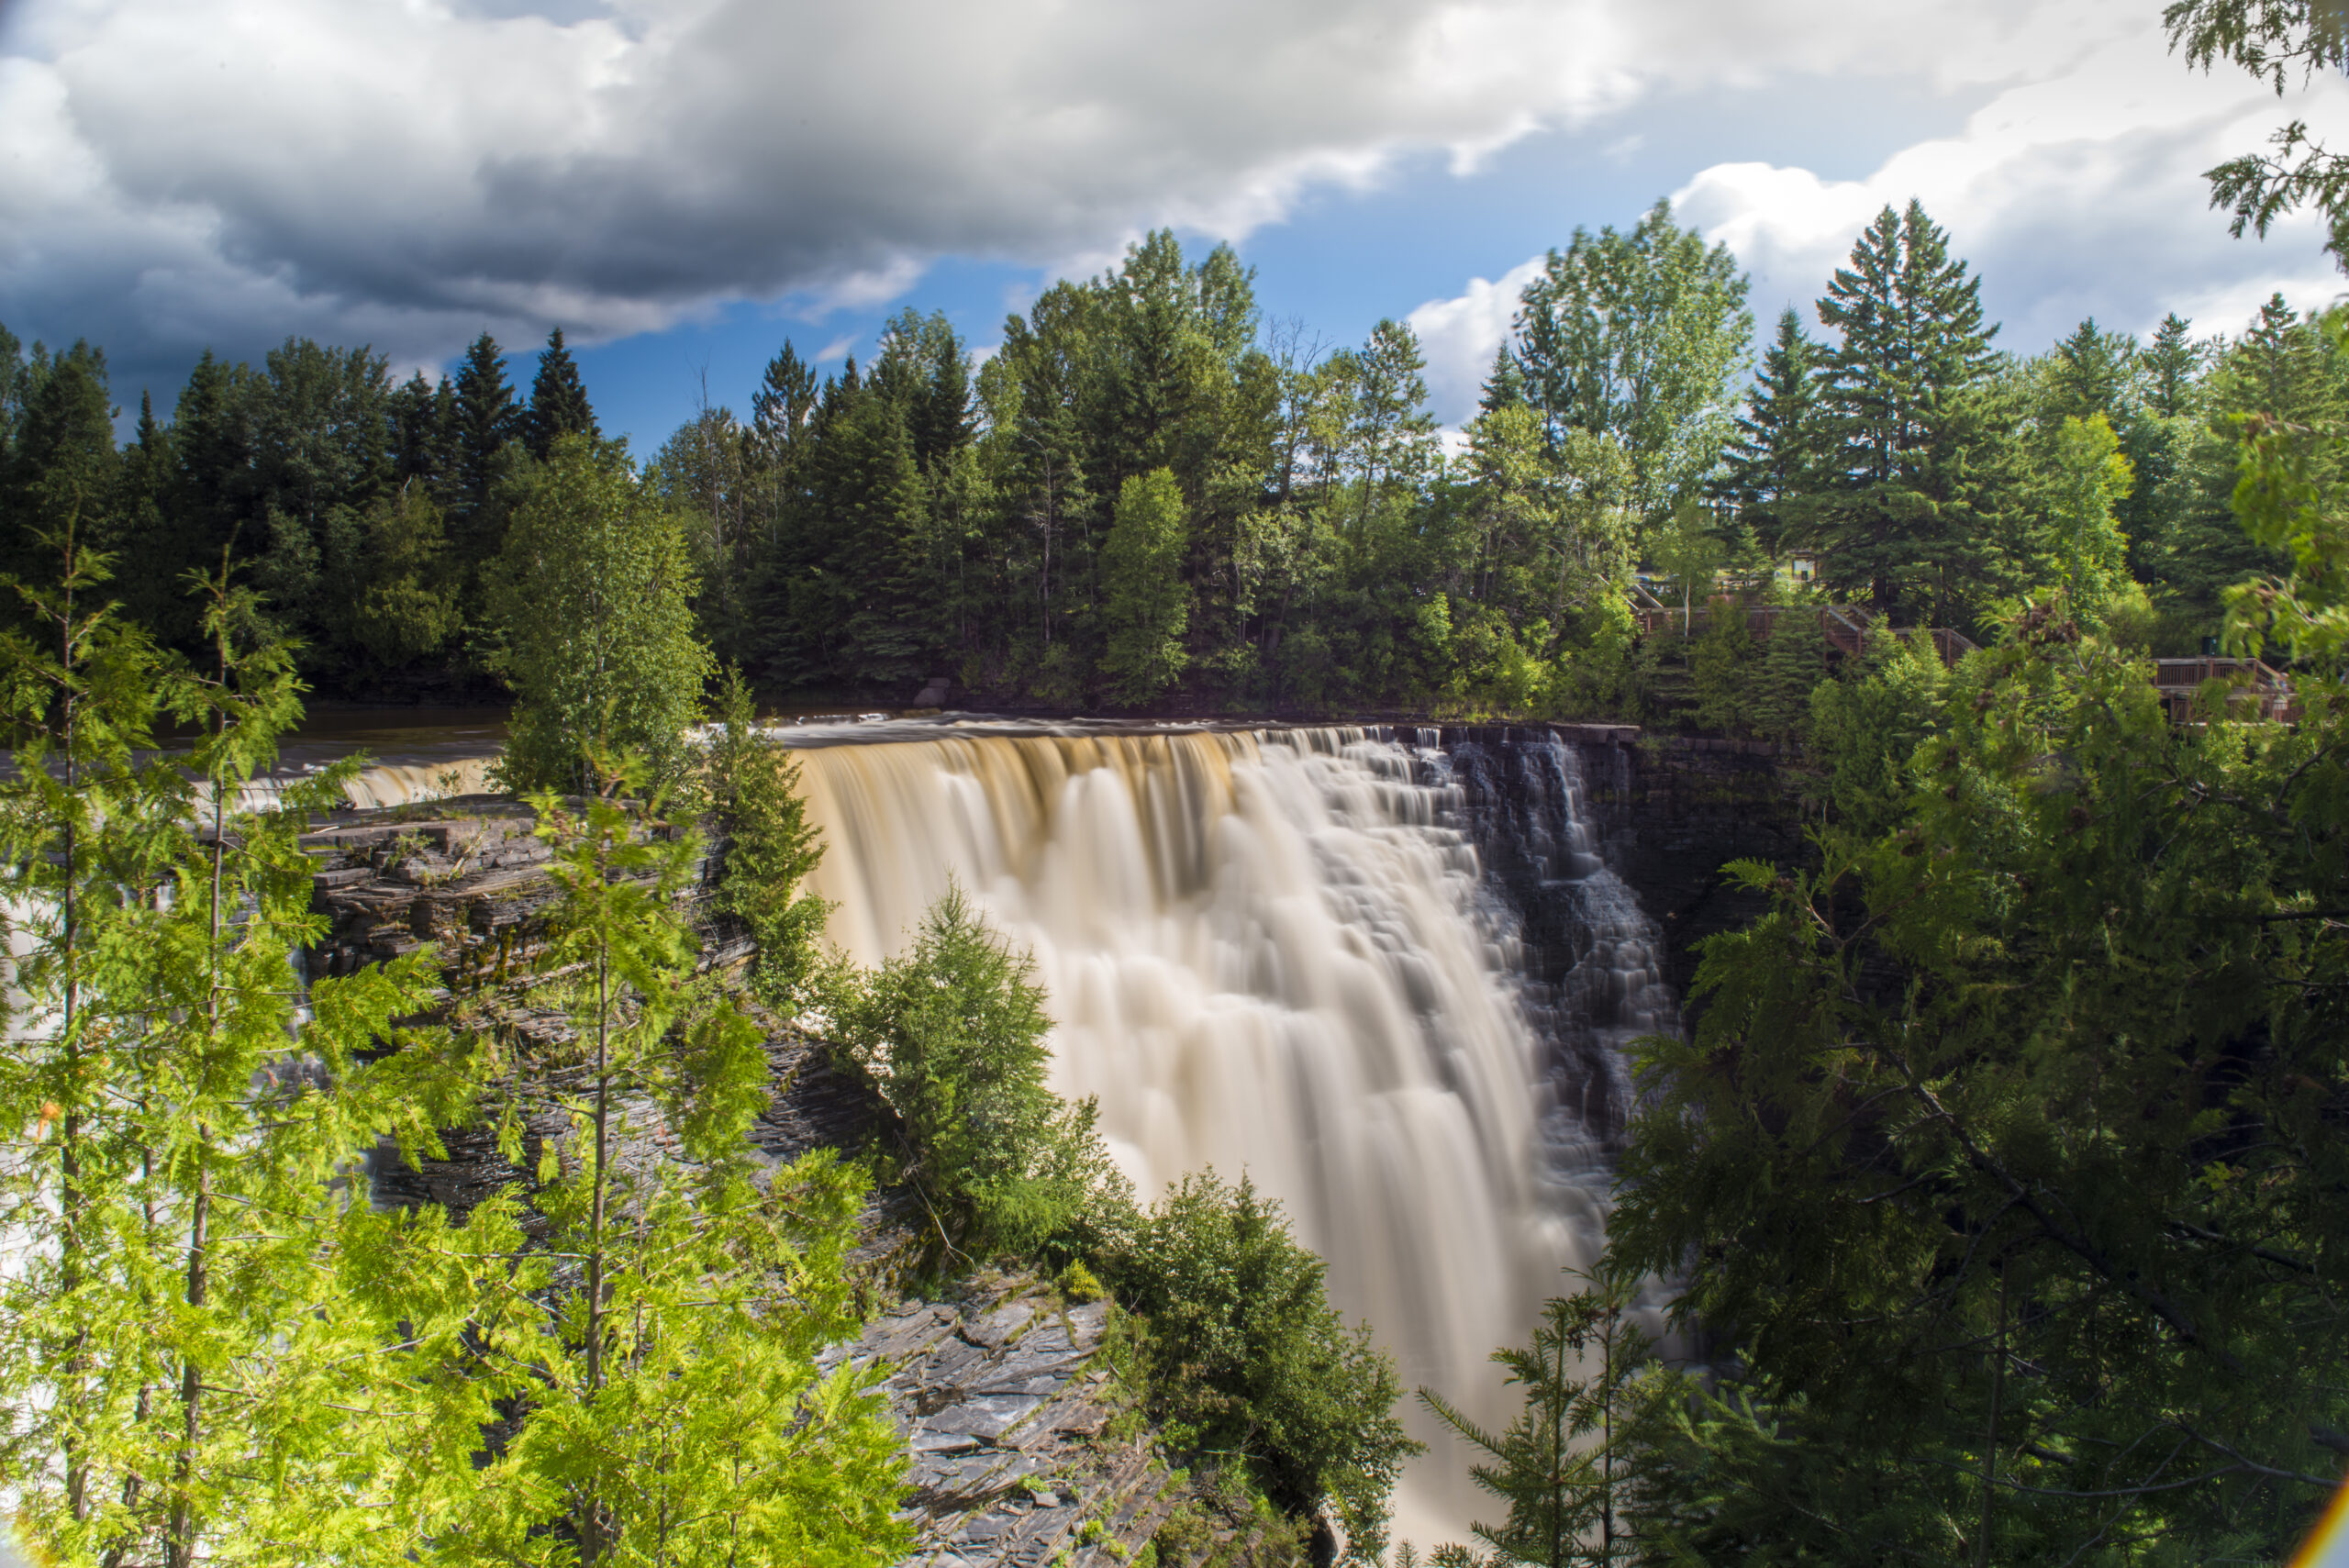 The power of Northern Ontario's Waterfalls